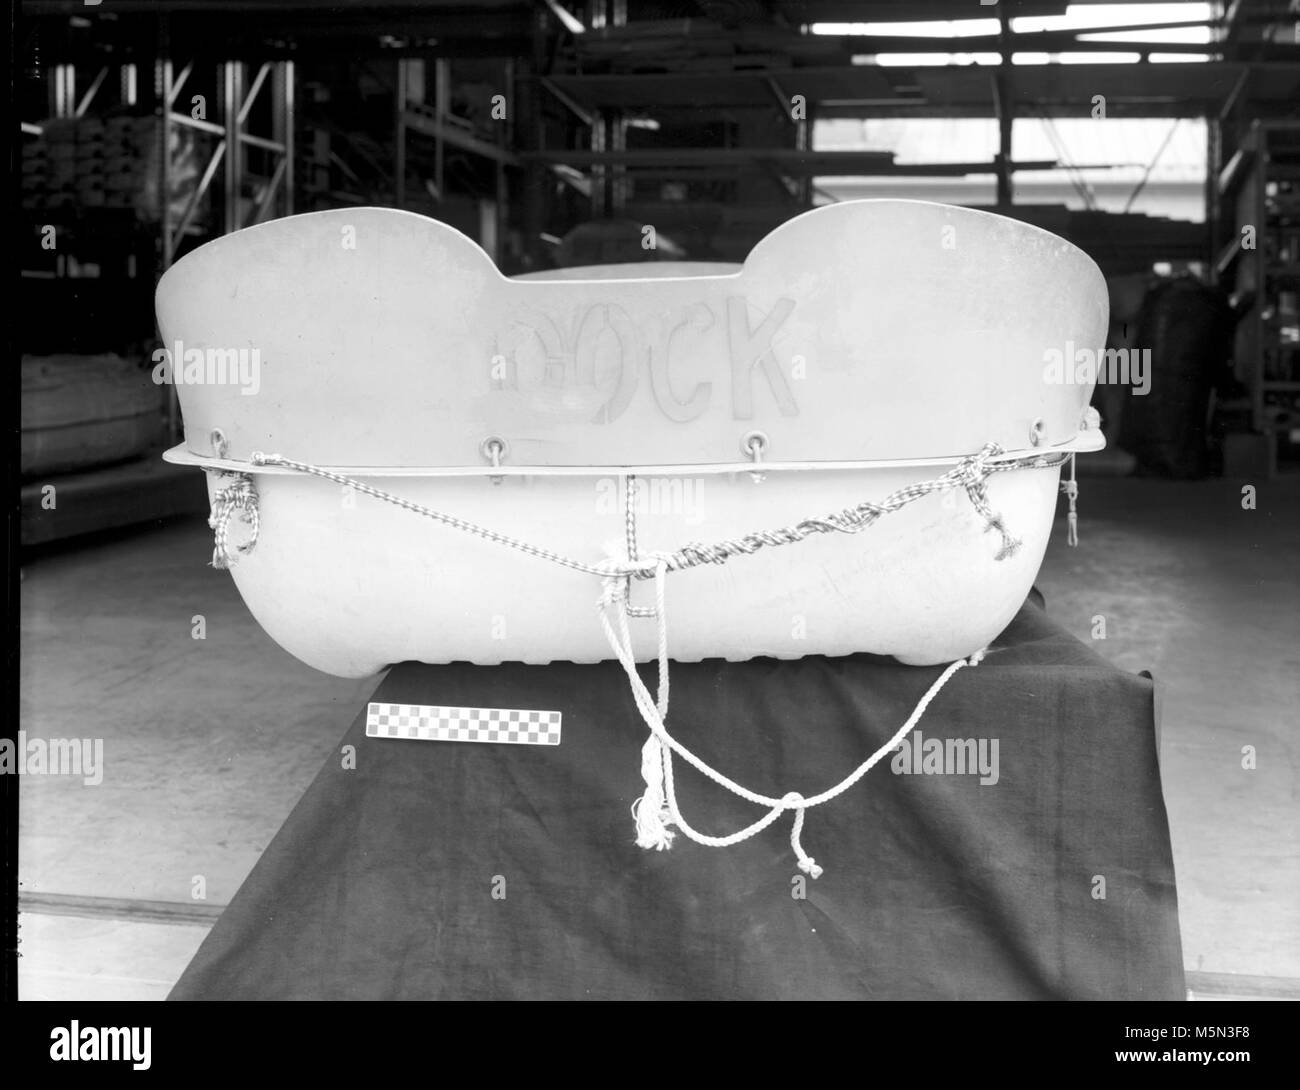 GRCA  Grand Canyon Historical Boat Collection Sportyak II (Dock) . Catalog # GRCA 9085  Object:  BOAT Description:   Sportyak named the 'Dock'.  The 'Dock' is a Sportyak II, made by Dayton Marine Products, Inc. and is vacuum formed of linear polyethelene. Length: 88 3/8 inches;  Beam: 44 1/2 inches;  Height of bow: 21 1/4 inches;  Height of transom 16 inches;  Height of midship 14+ inches: Weight: 38 pounds This boat was used by Otis ’Dock’ Marston for a com Stock Photo